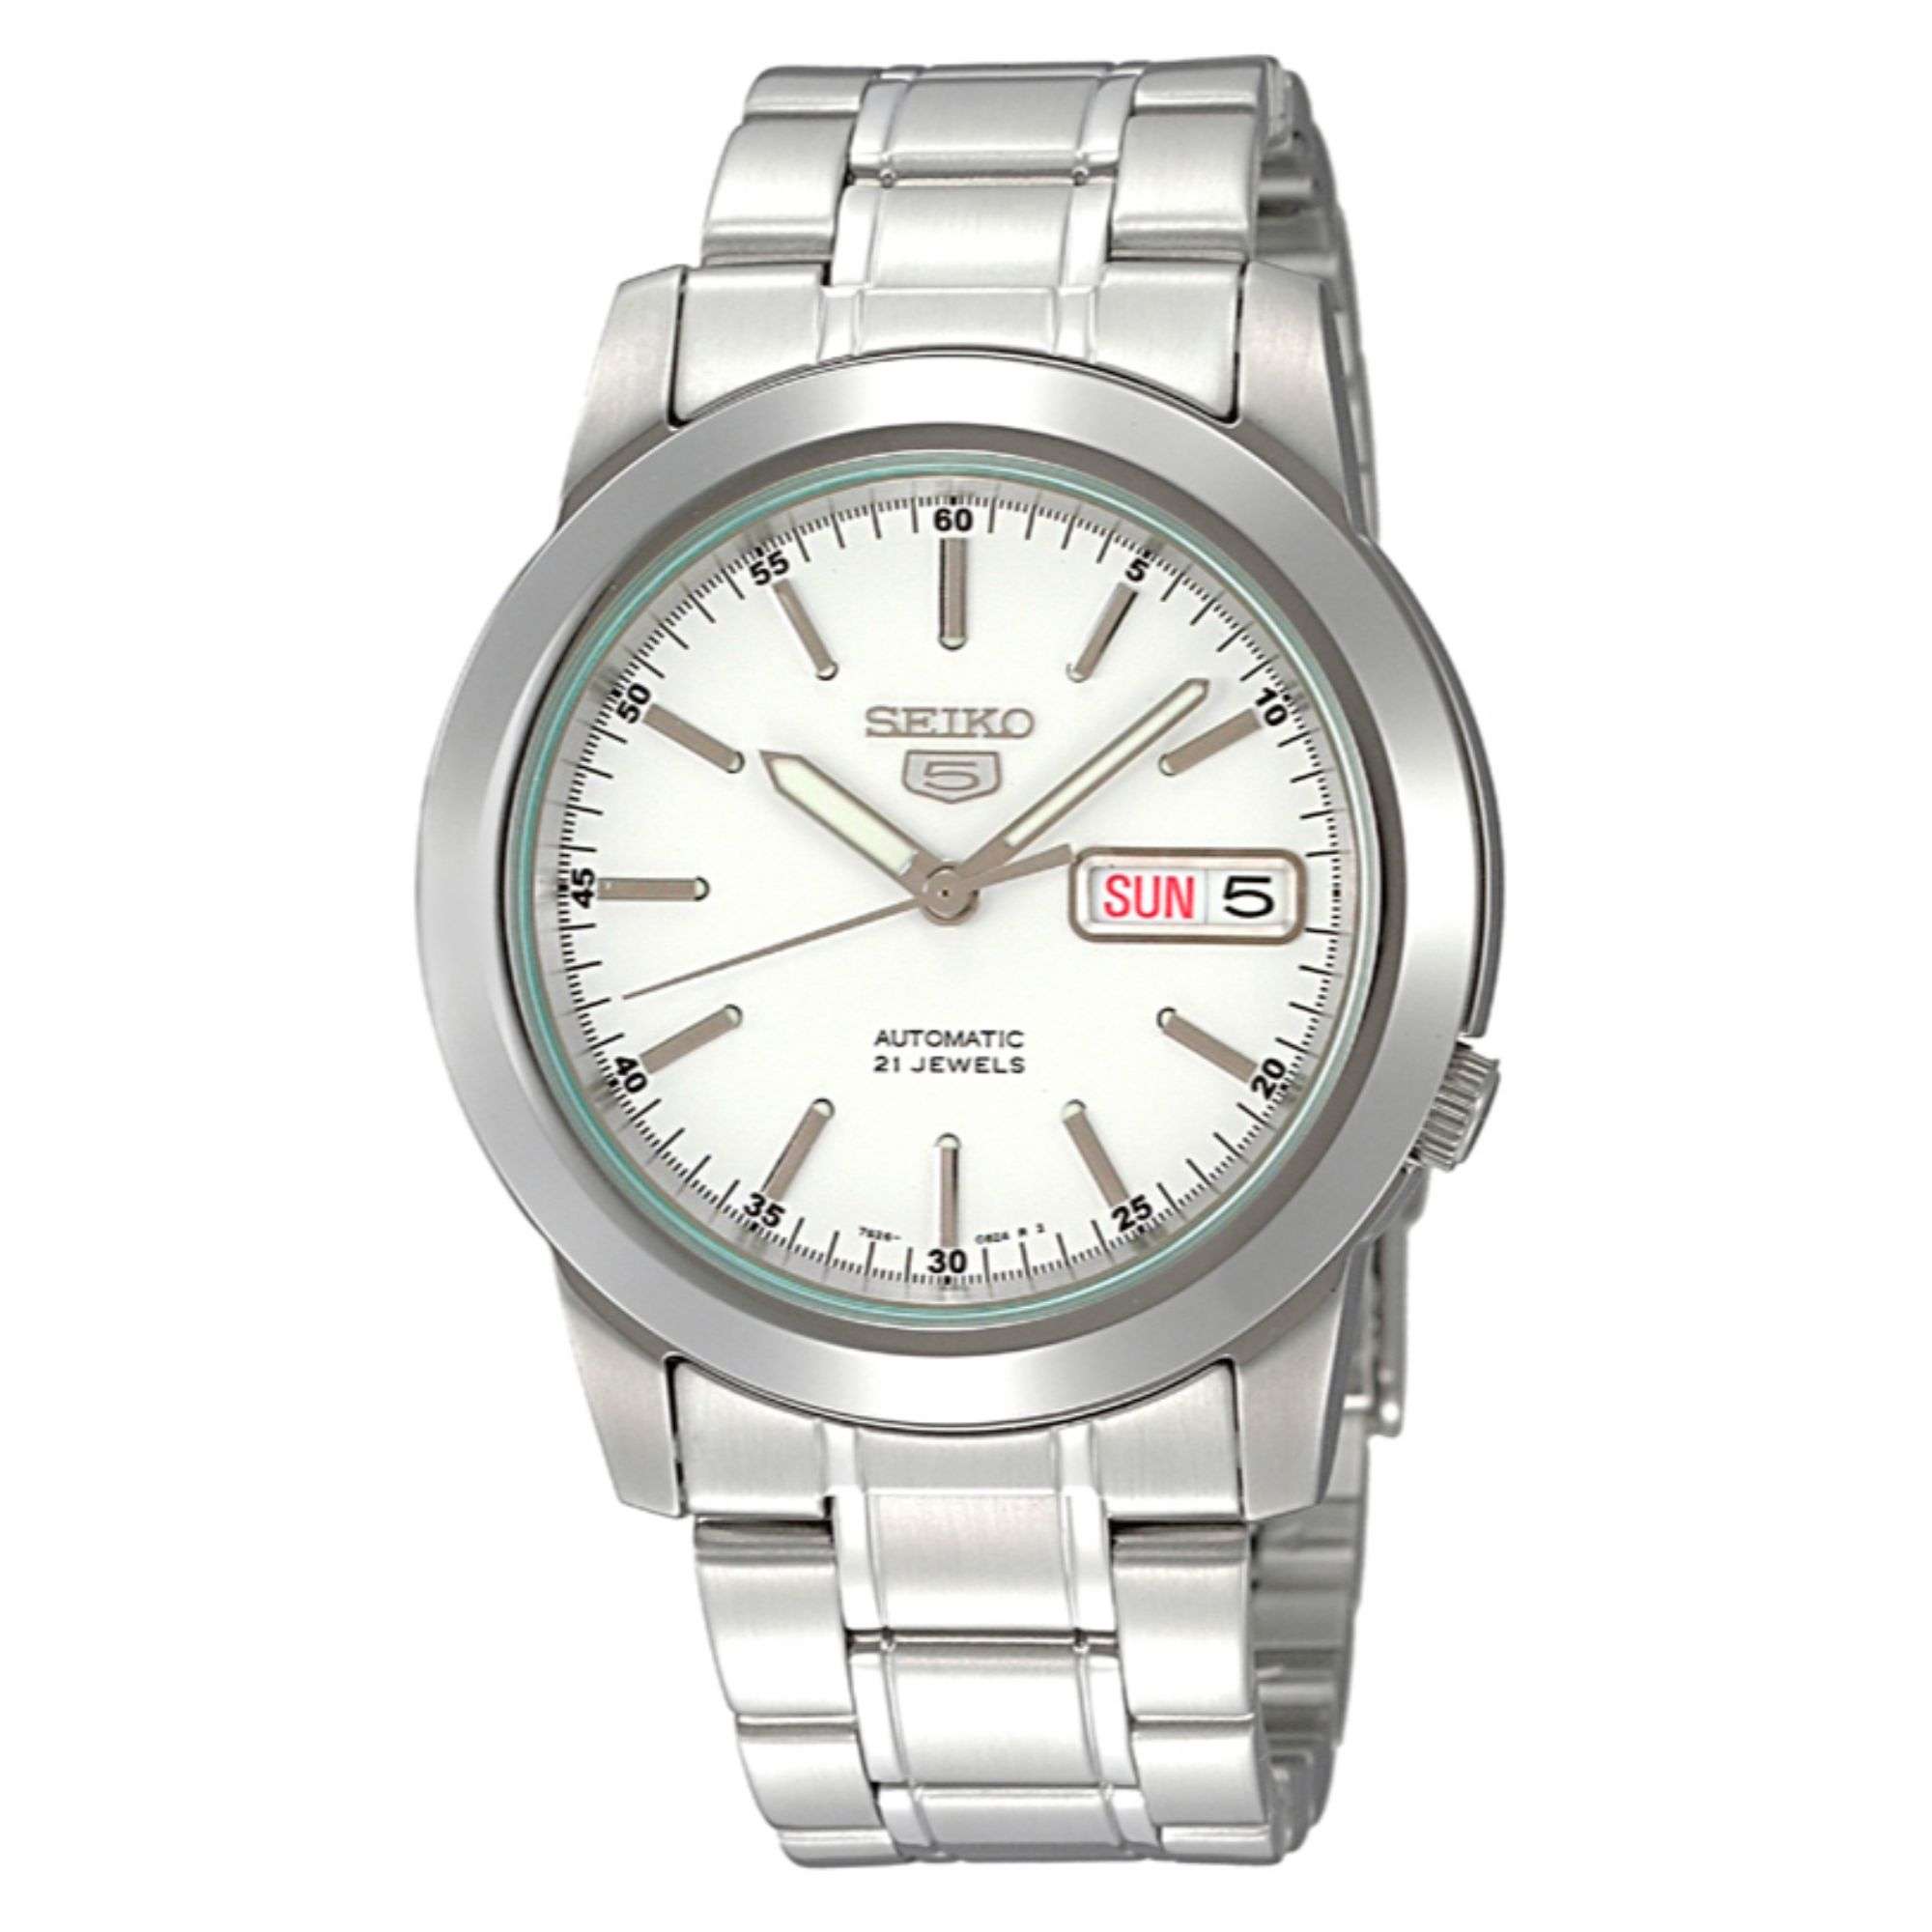 Seiko 5 Watches: Great Quality & Overnight Delivery